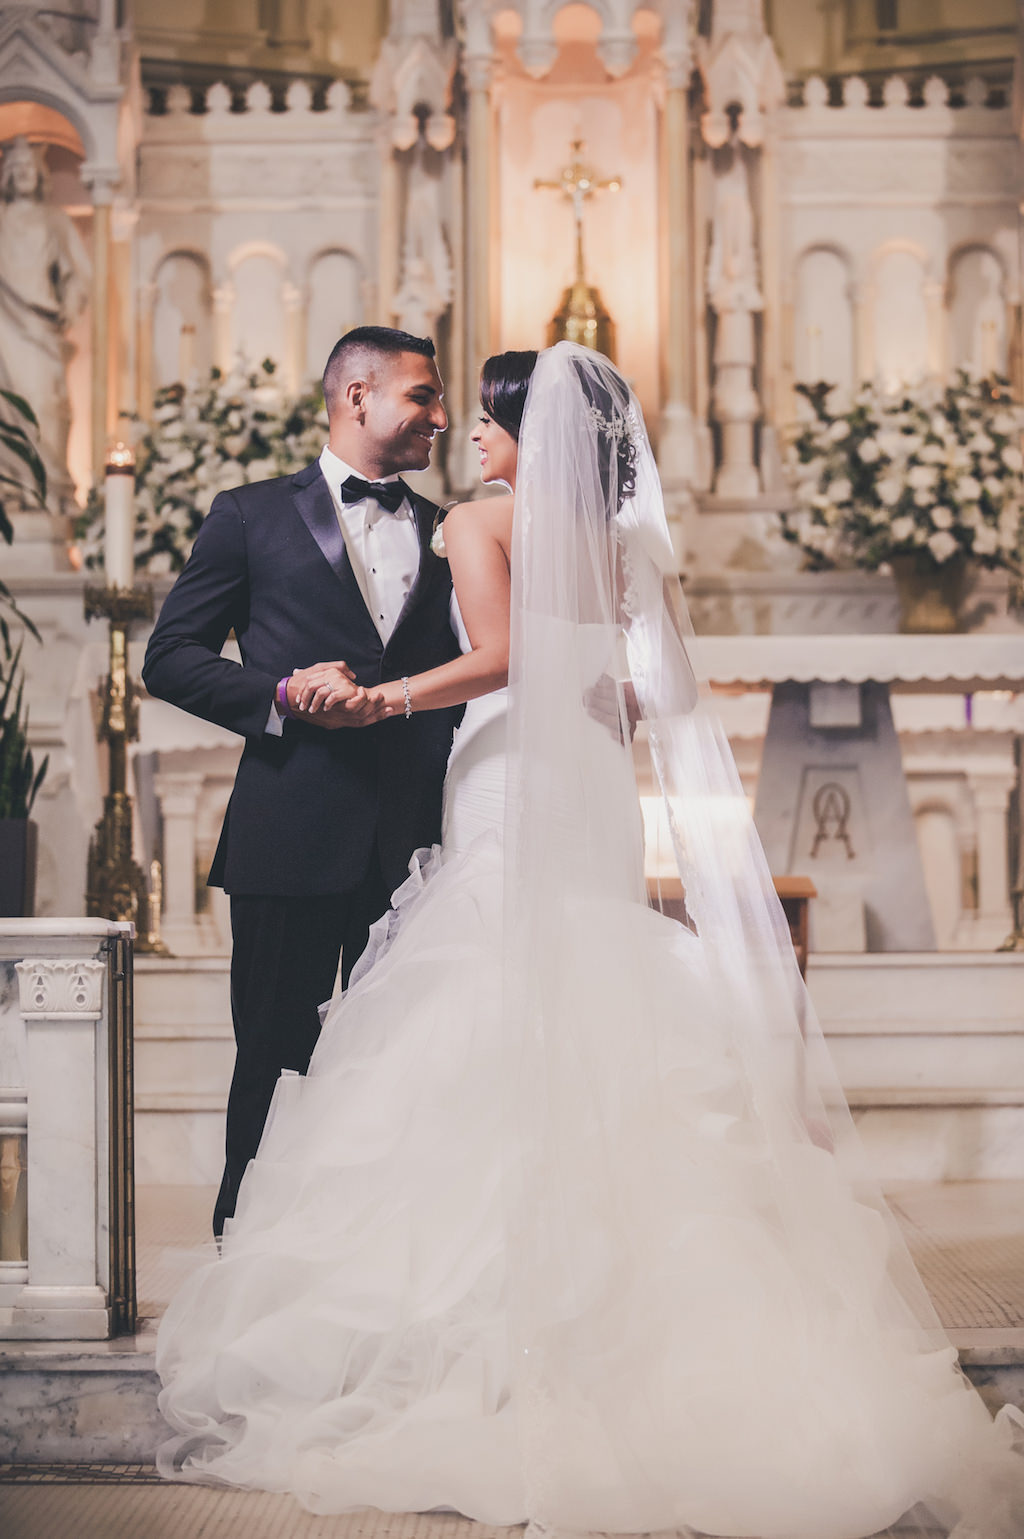 Traditional Church Wedding Ceremony, With White and Greenery Flower Arrangements Bride in Pronovias Layered Mermaid Strapless Dress | Downtown Tampa Wedding Ceremony Venue Sacred Heart Catholic Church